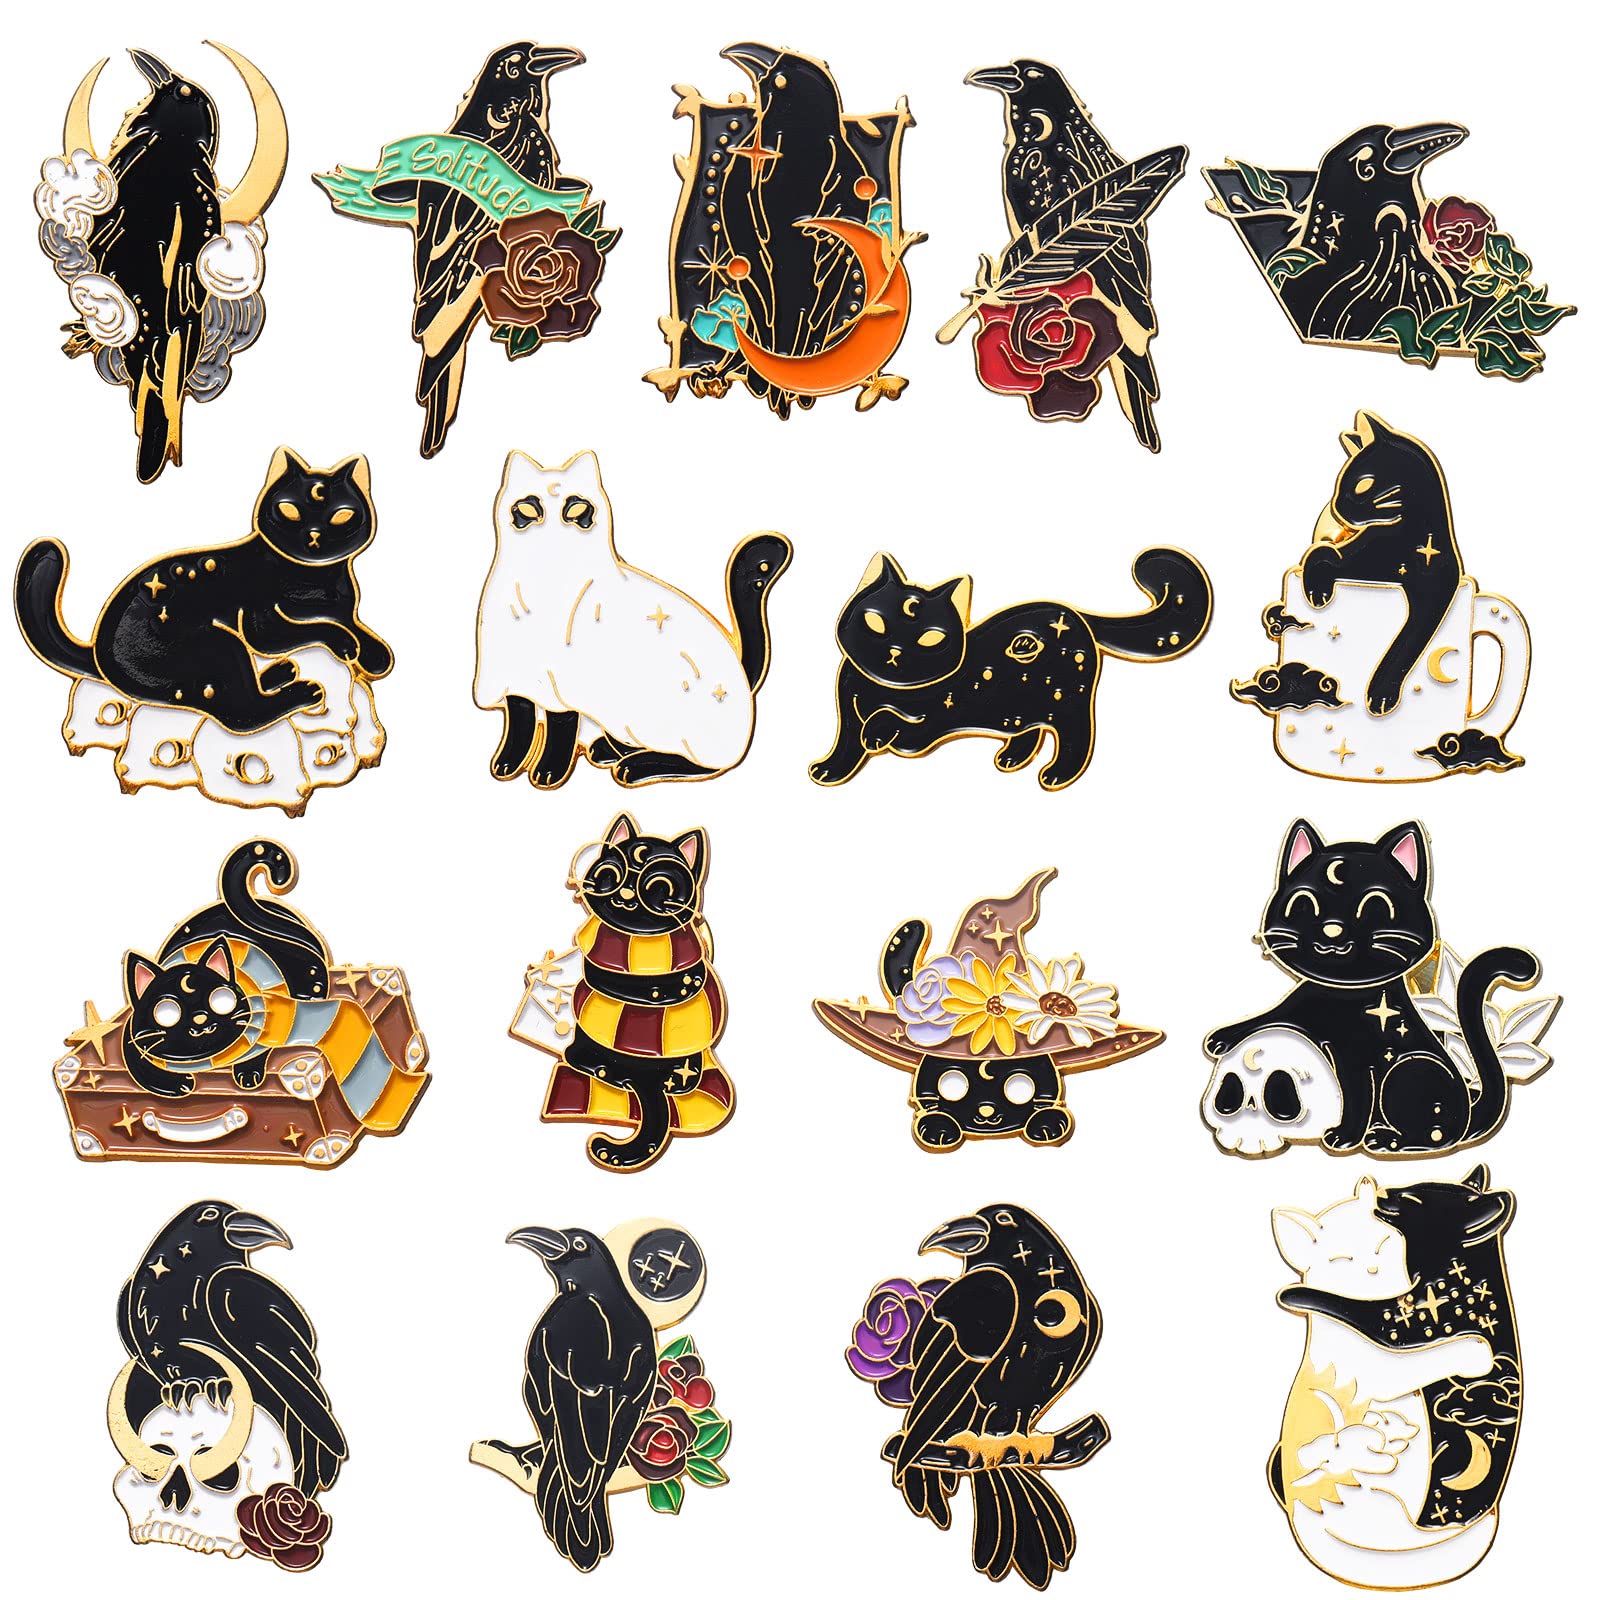 Unittype 26 Pcs Butterfly Pins Set Cute Backpacks Pins Cats Black Crow Gothic Pins Aesthetic Pins for Women Men DIY Badge Clothing Jackets Bags Decoration